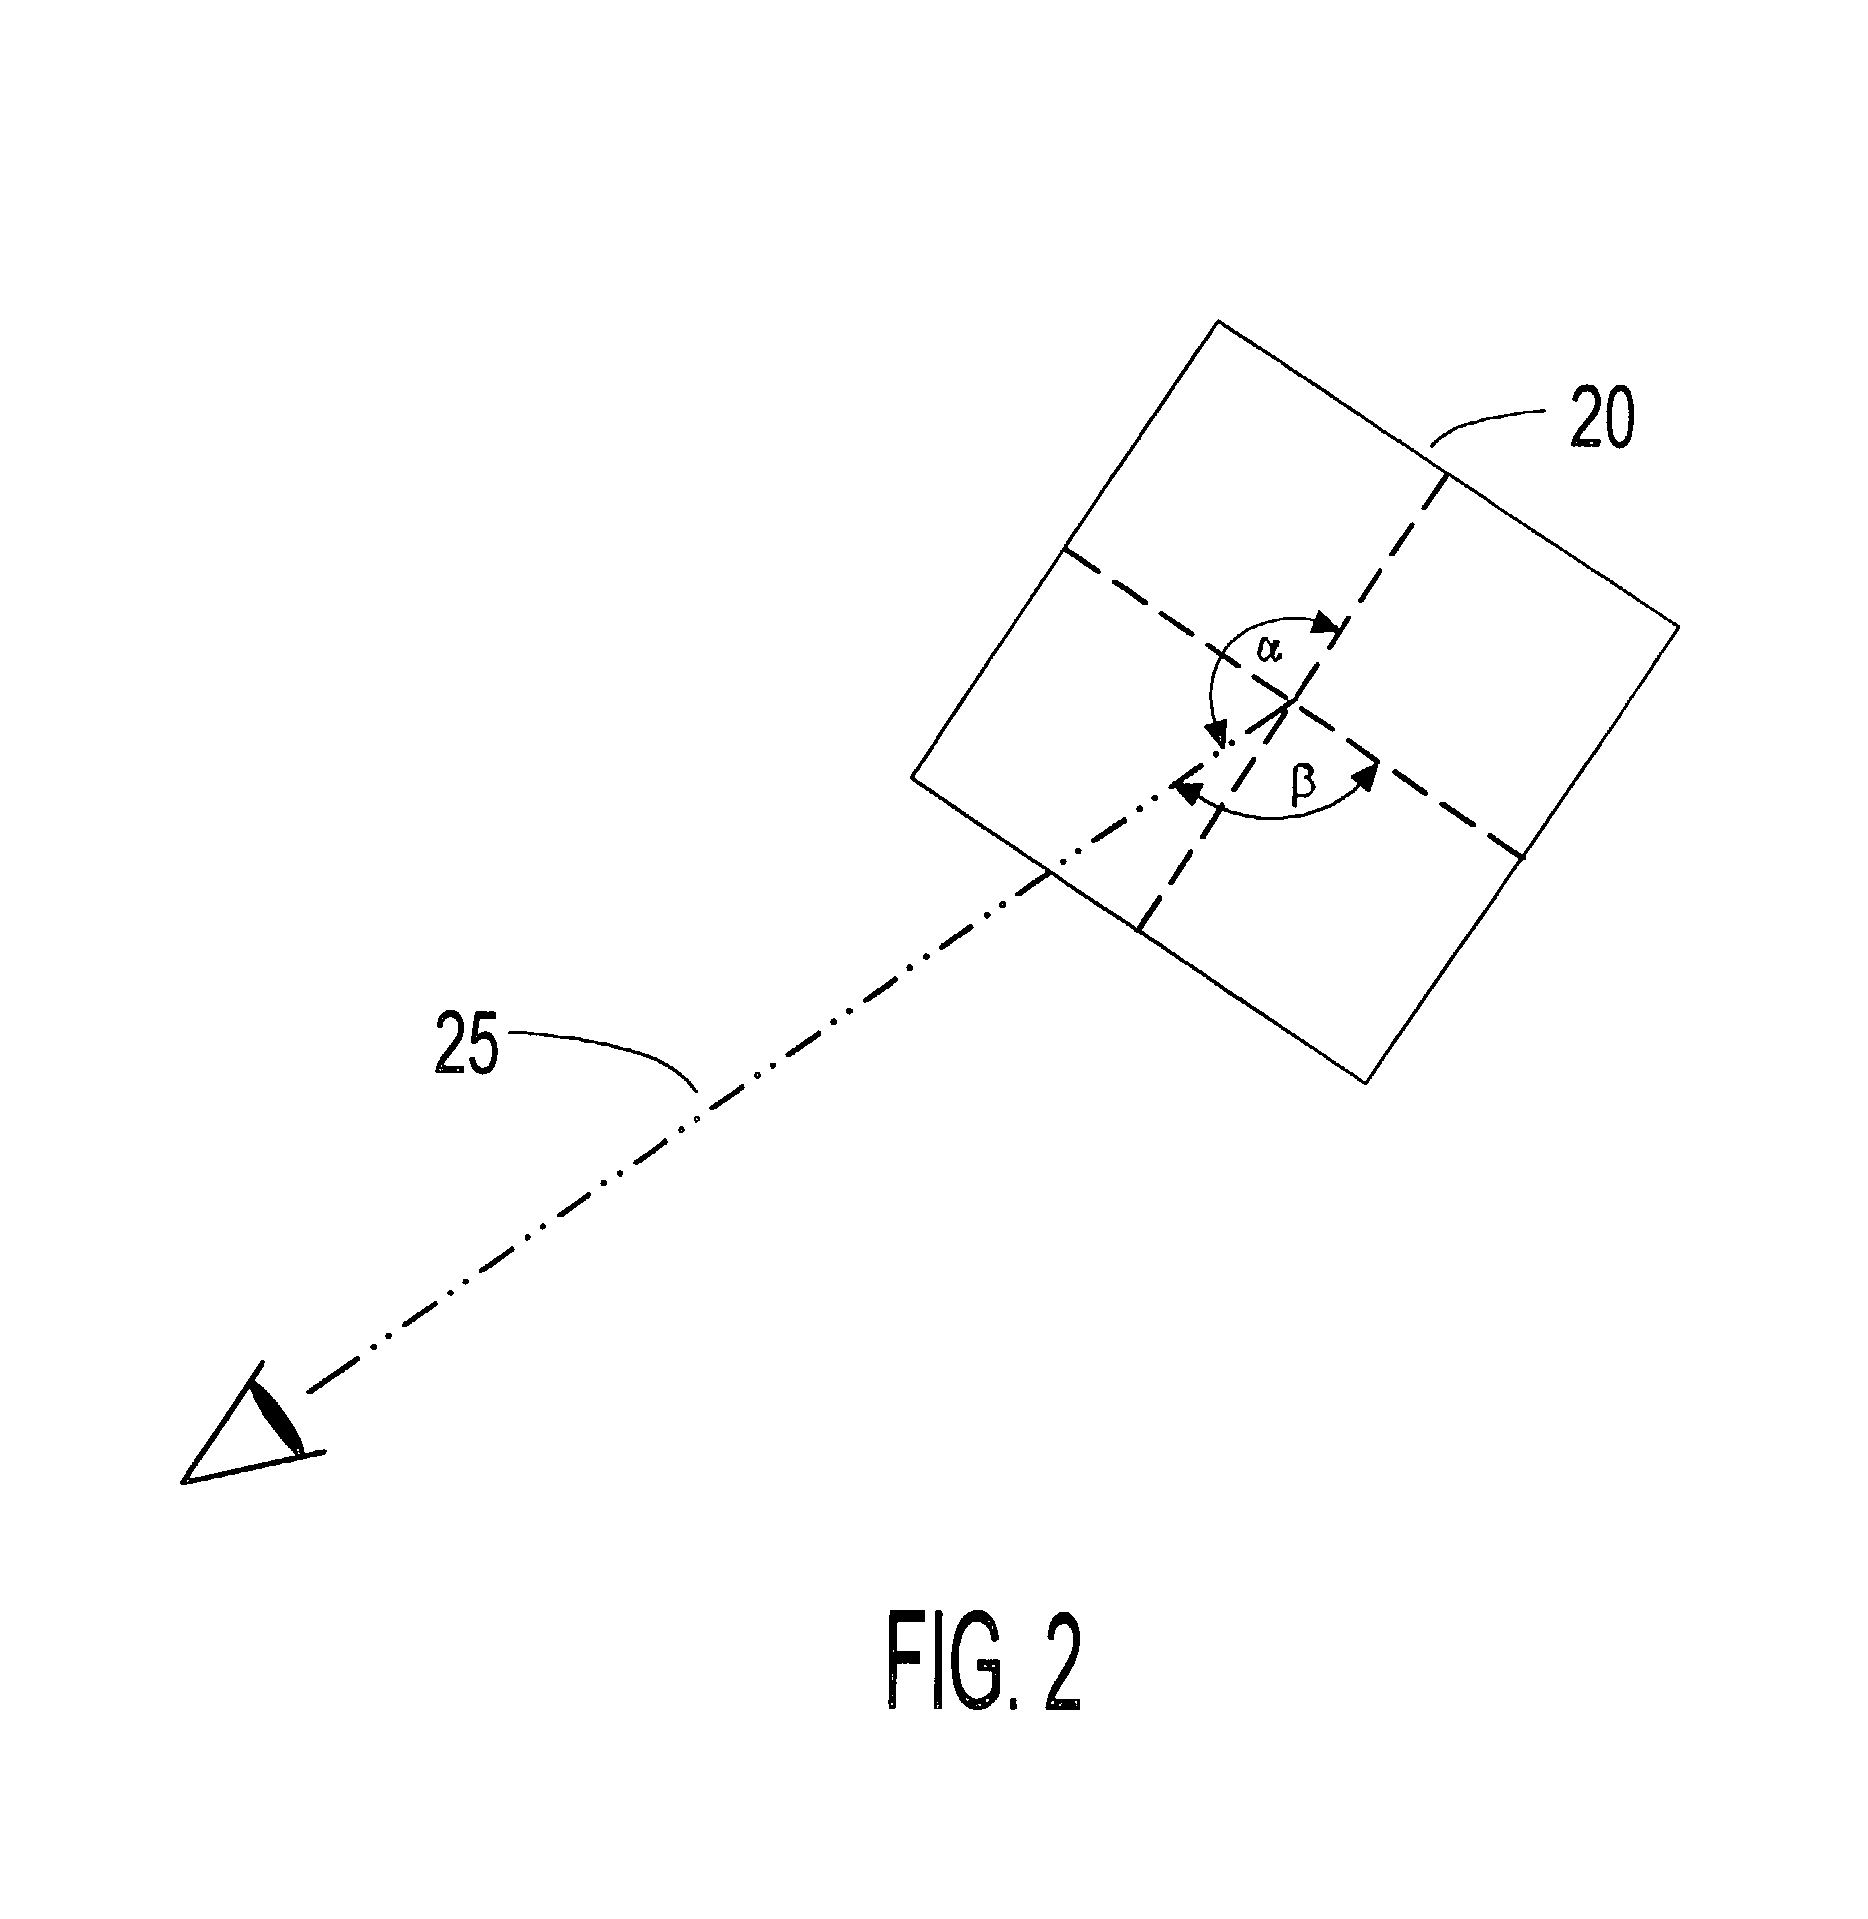 Virtual display apparatus for mobile activities